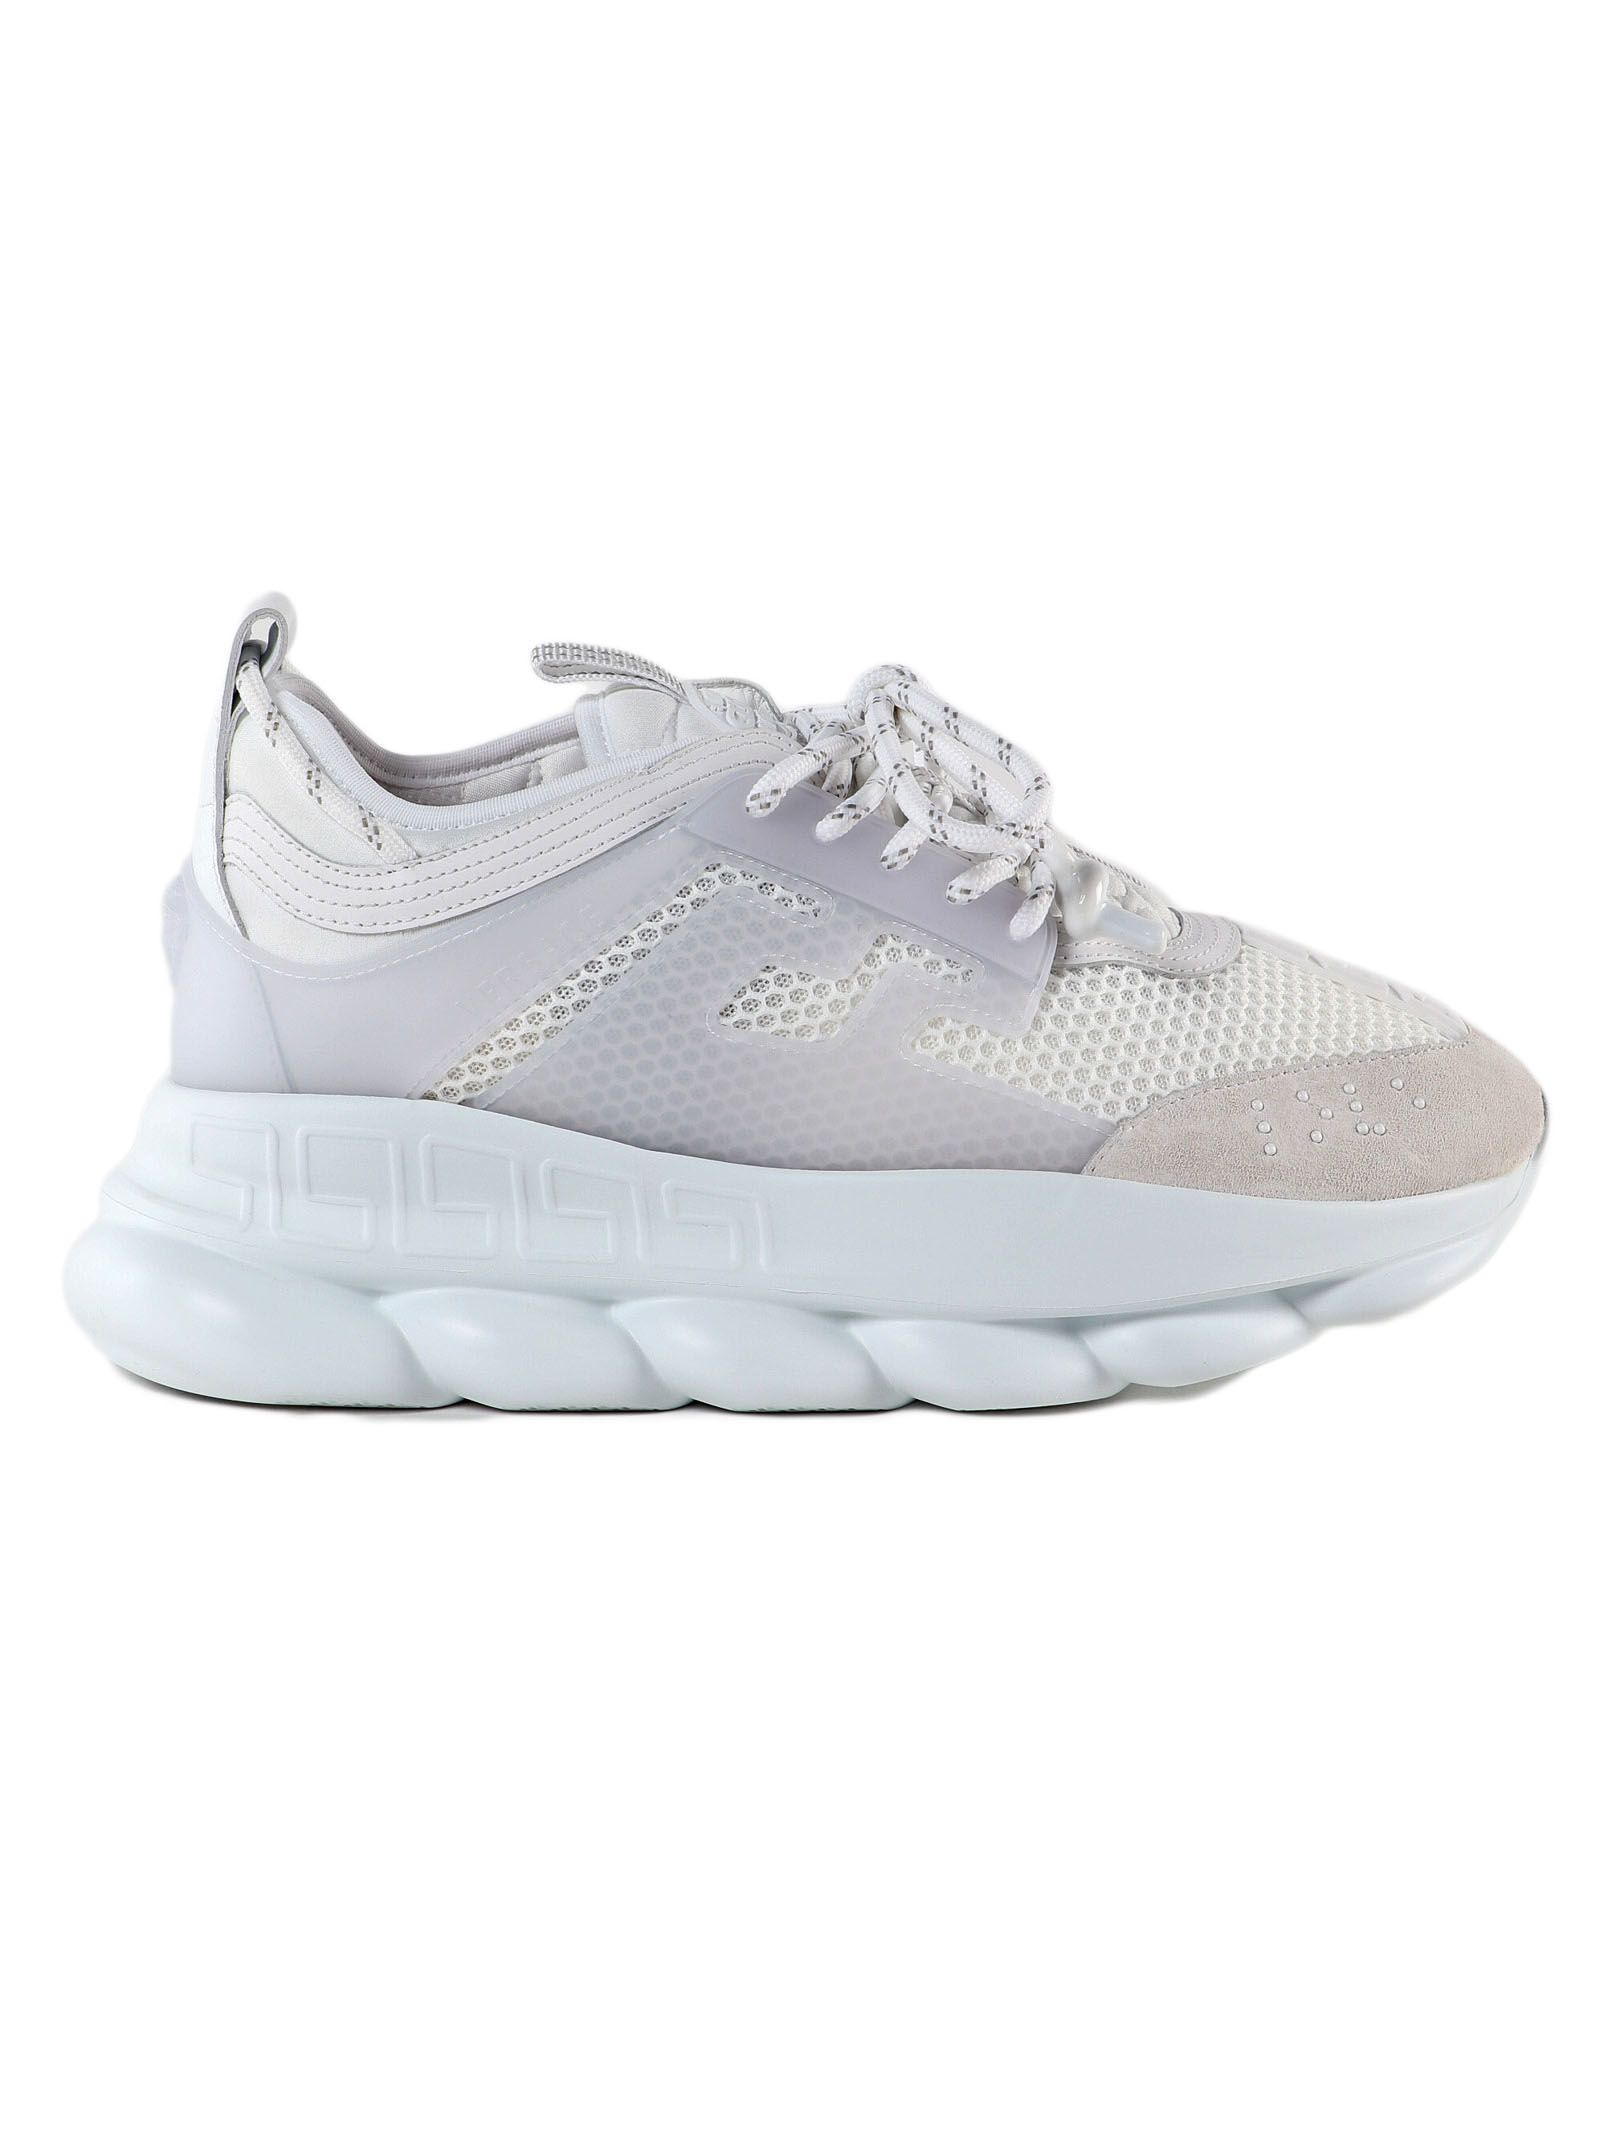 Versace Versace Chain Reaction Sneakers - White - 10794257 | italist